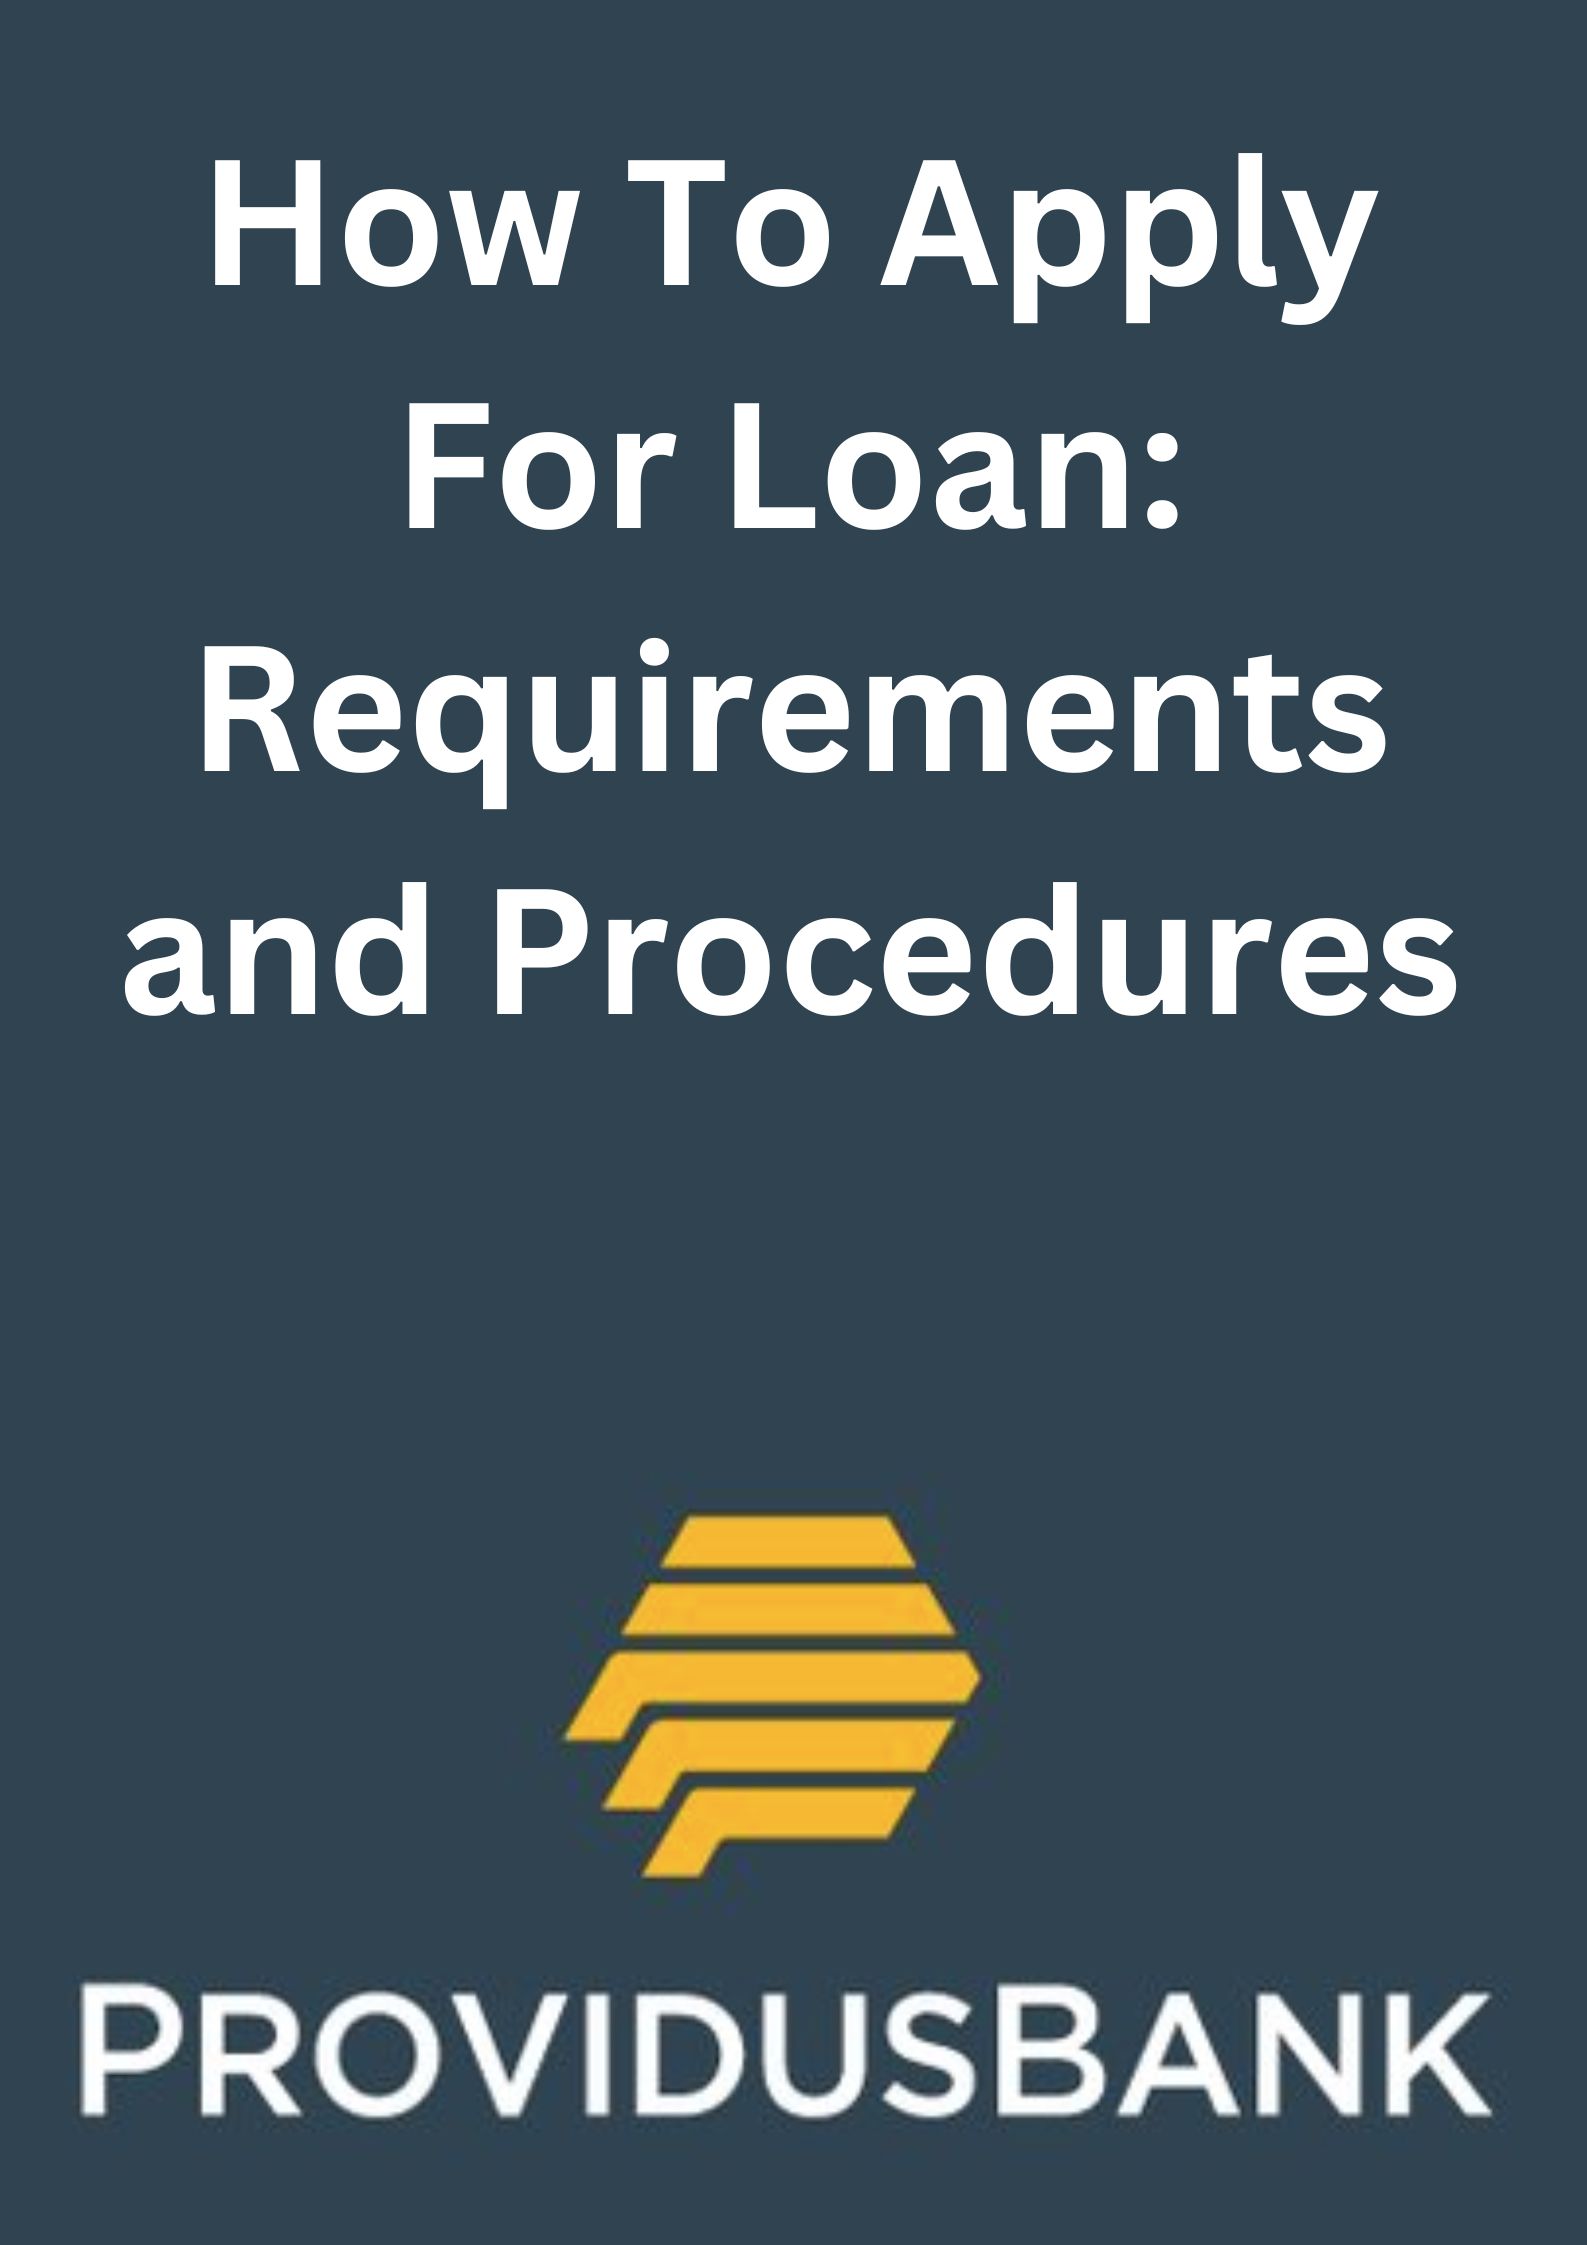 How To Apply For Loan In Providus Bank